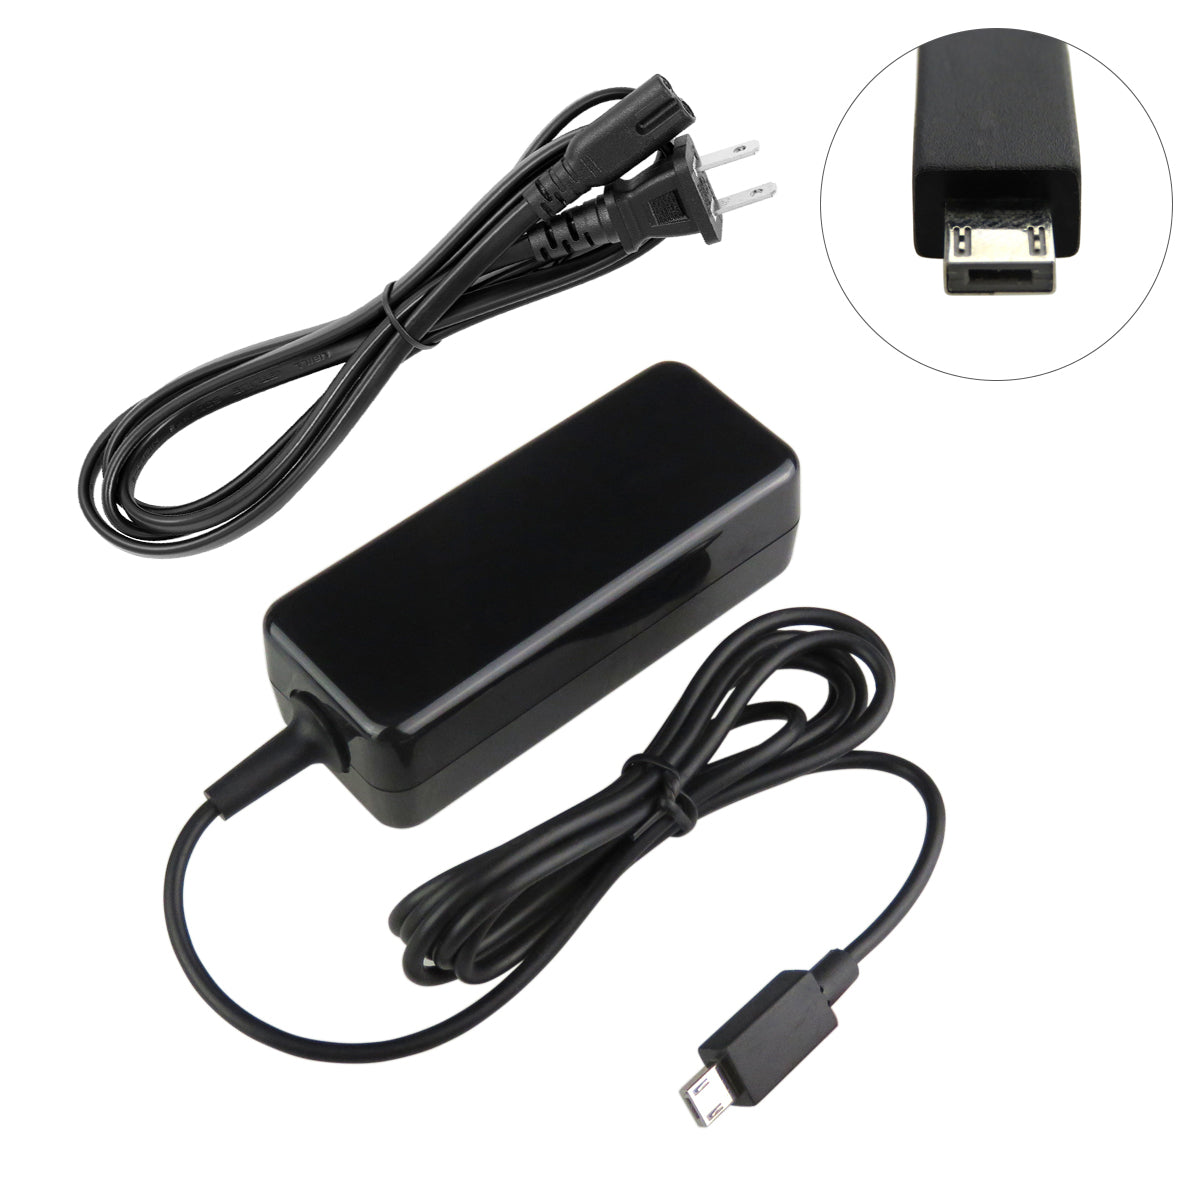 Charger for ASUS EeeBook X205TA-DH01 Laptop.